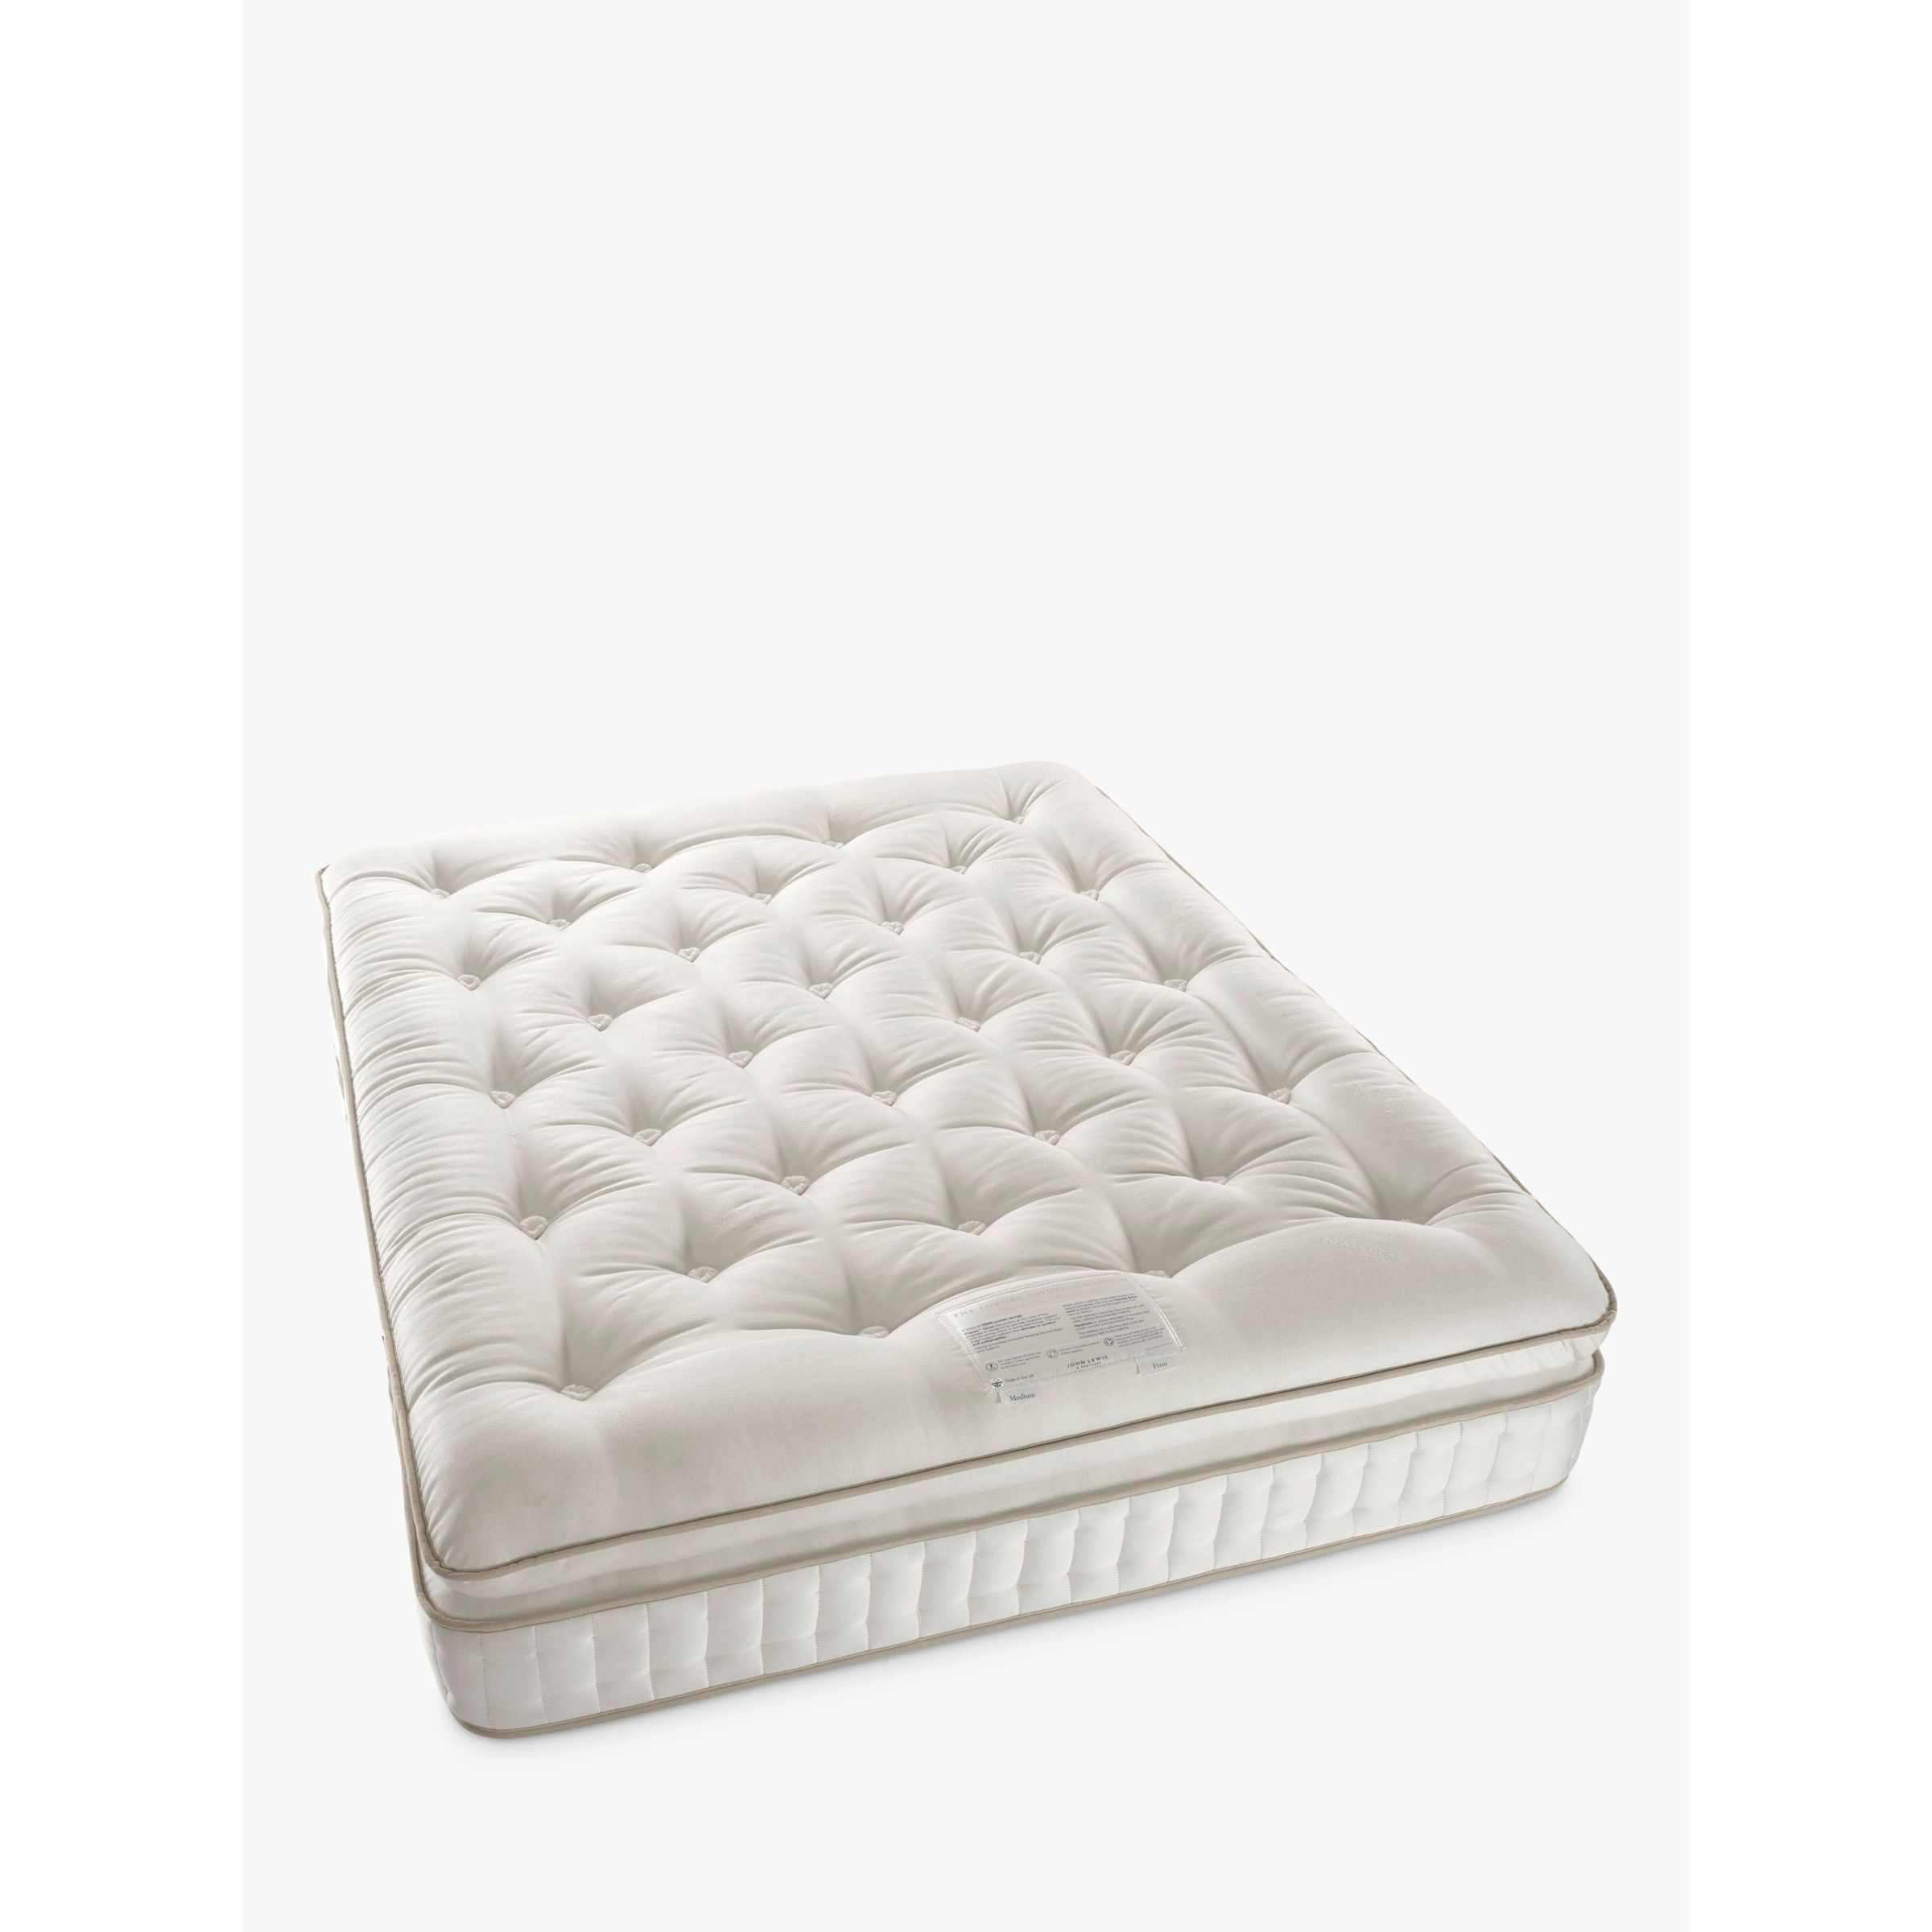 John Lewis Luxury Natural Collection British Wool Pillowtop 11000, Double, Firmer Tension Pocket Spring Mattress - image 1